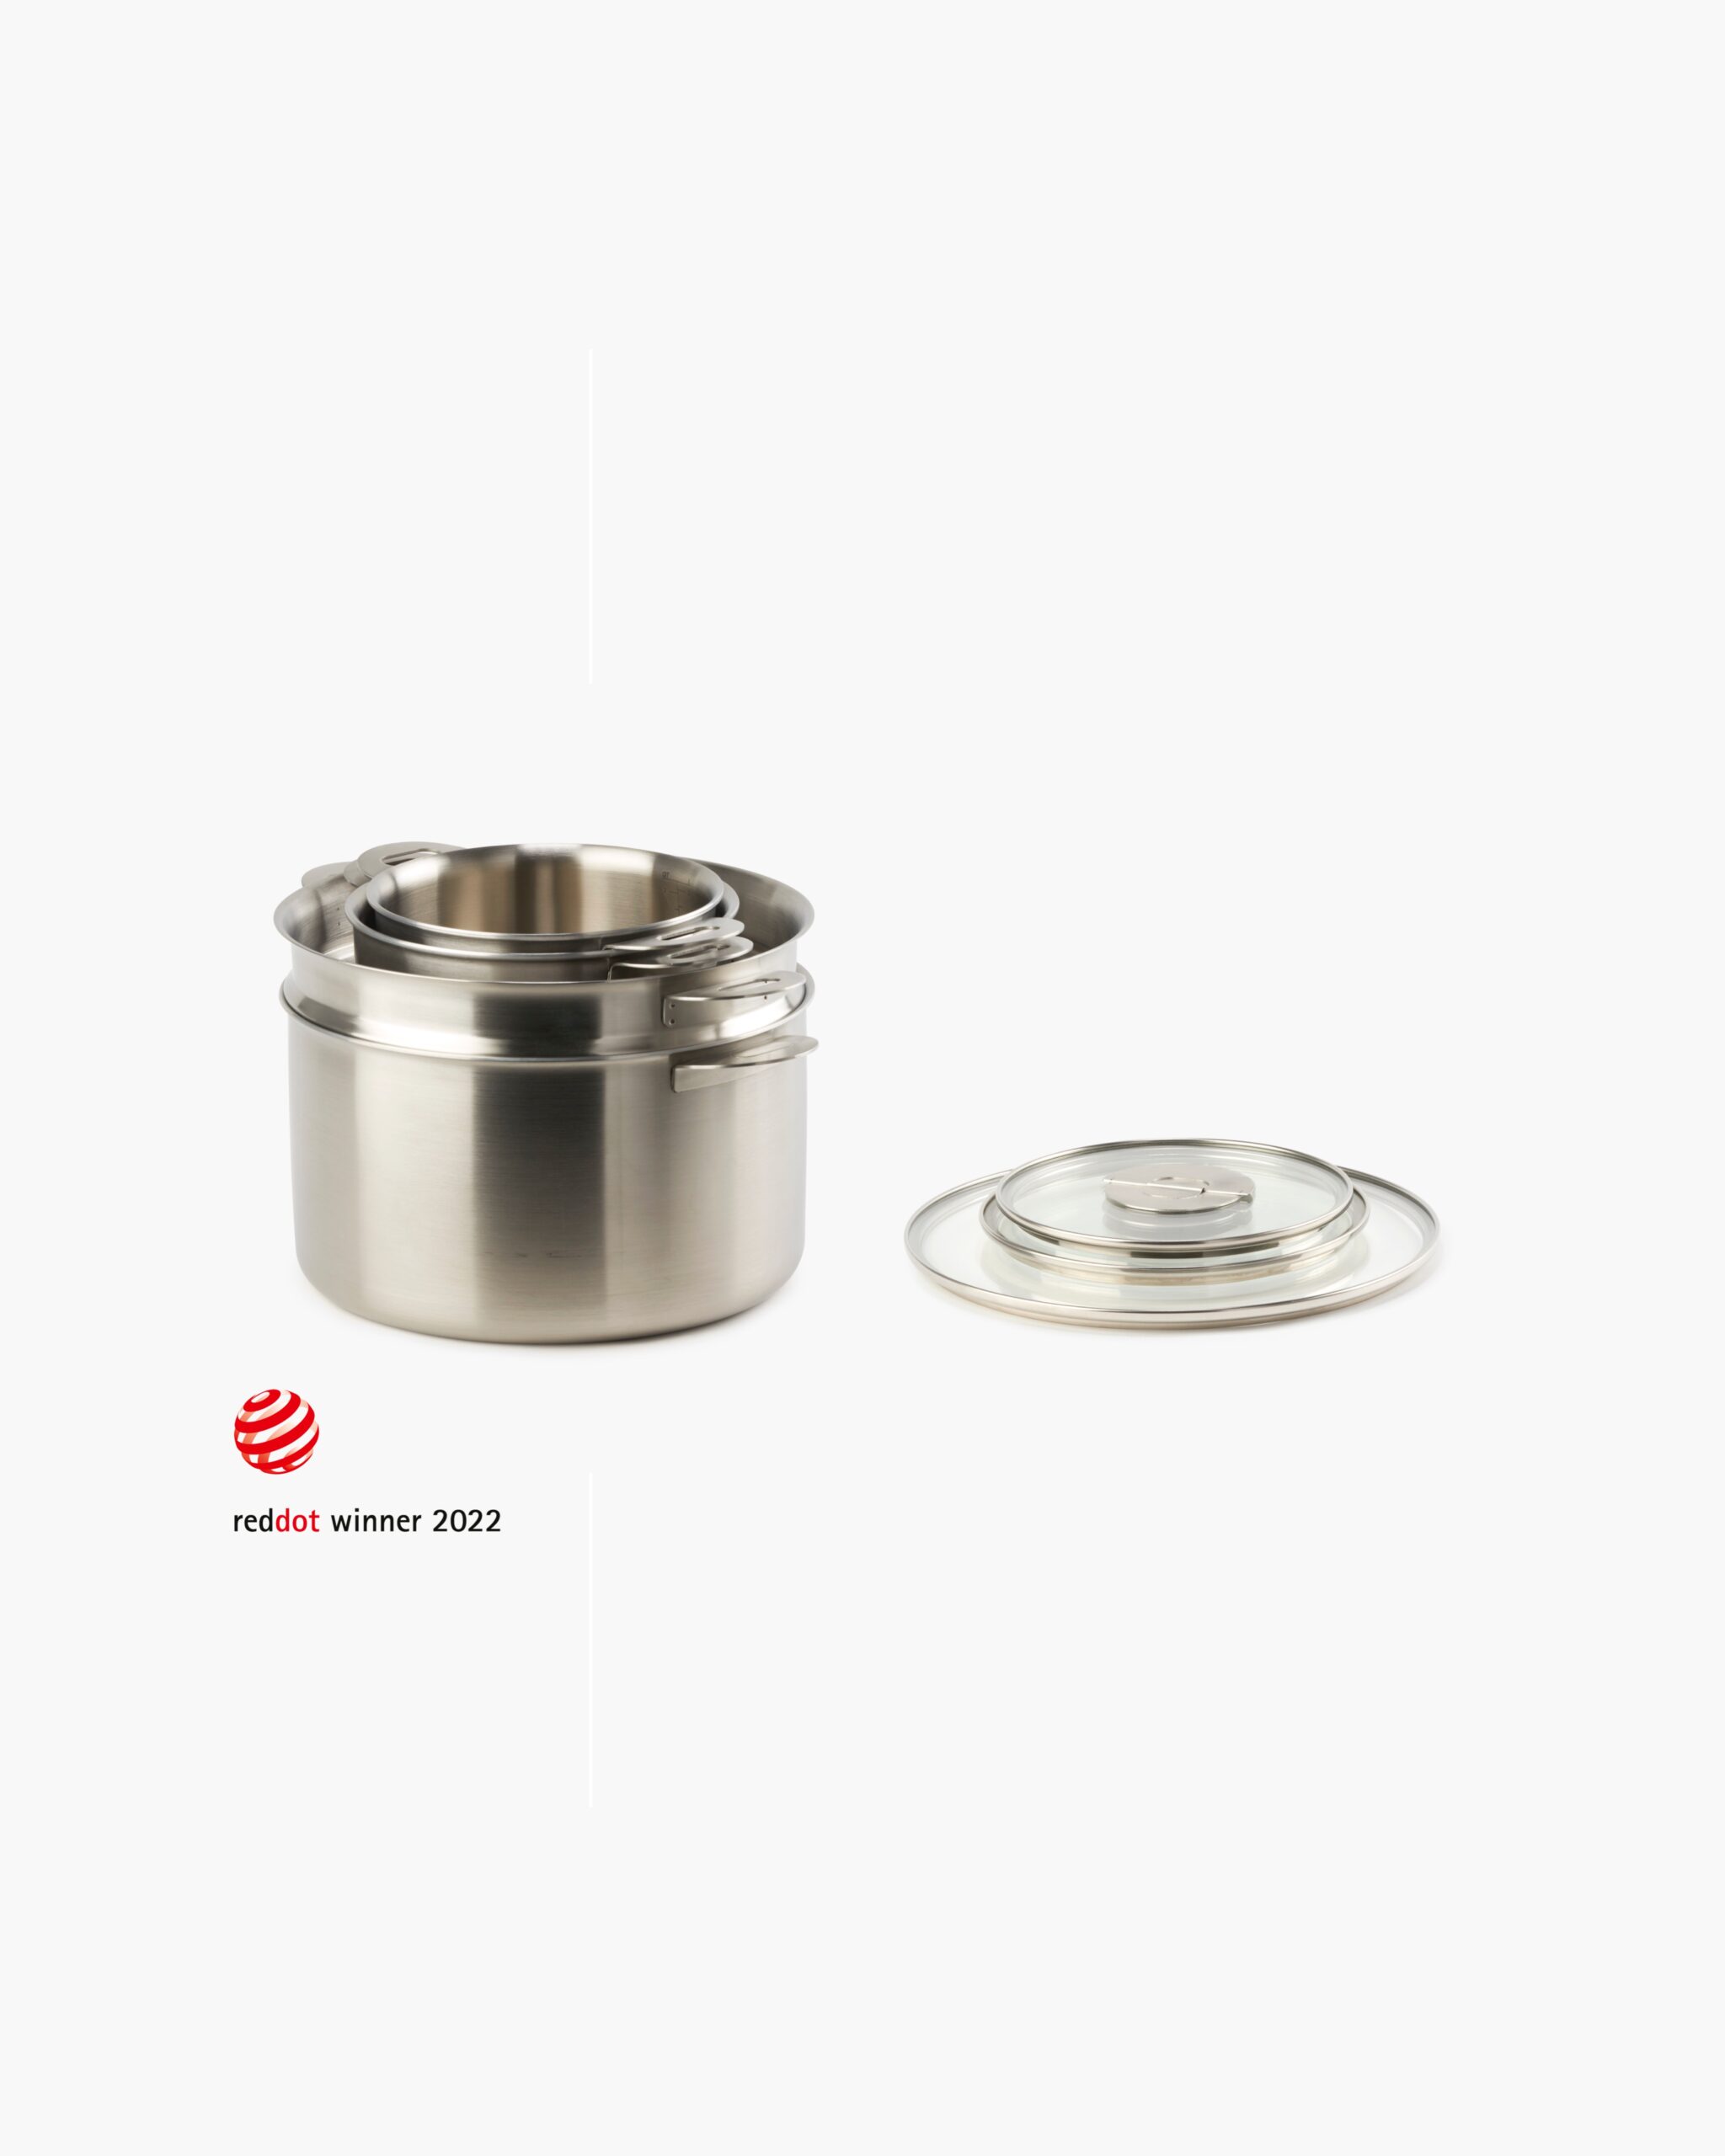 Shop ENSEMBL Stainless Steel Fully Clad Stacking Cookware Set with removable handles. Small Saucepan, Medium Saucepan, Stockpot, Steamer/Colander. Multifunctional, long-lasting, design-forward home wares. Best all purpose cookware set with lids. Perfect cookware set.